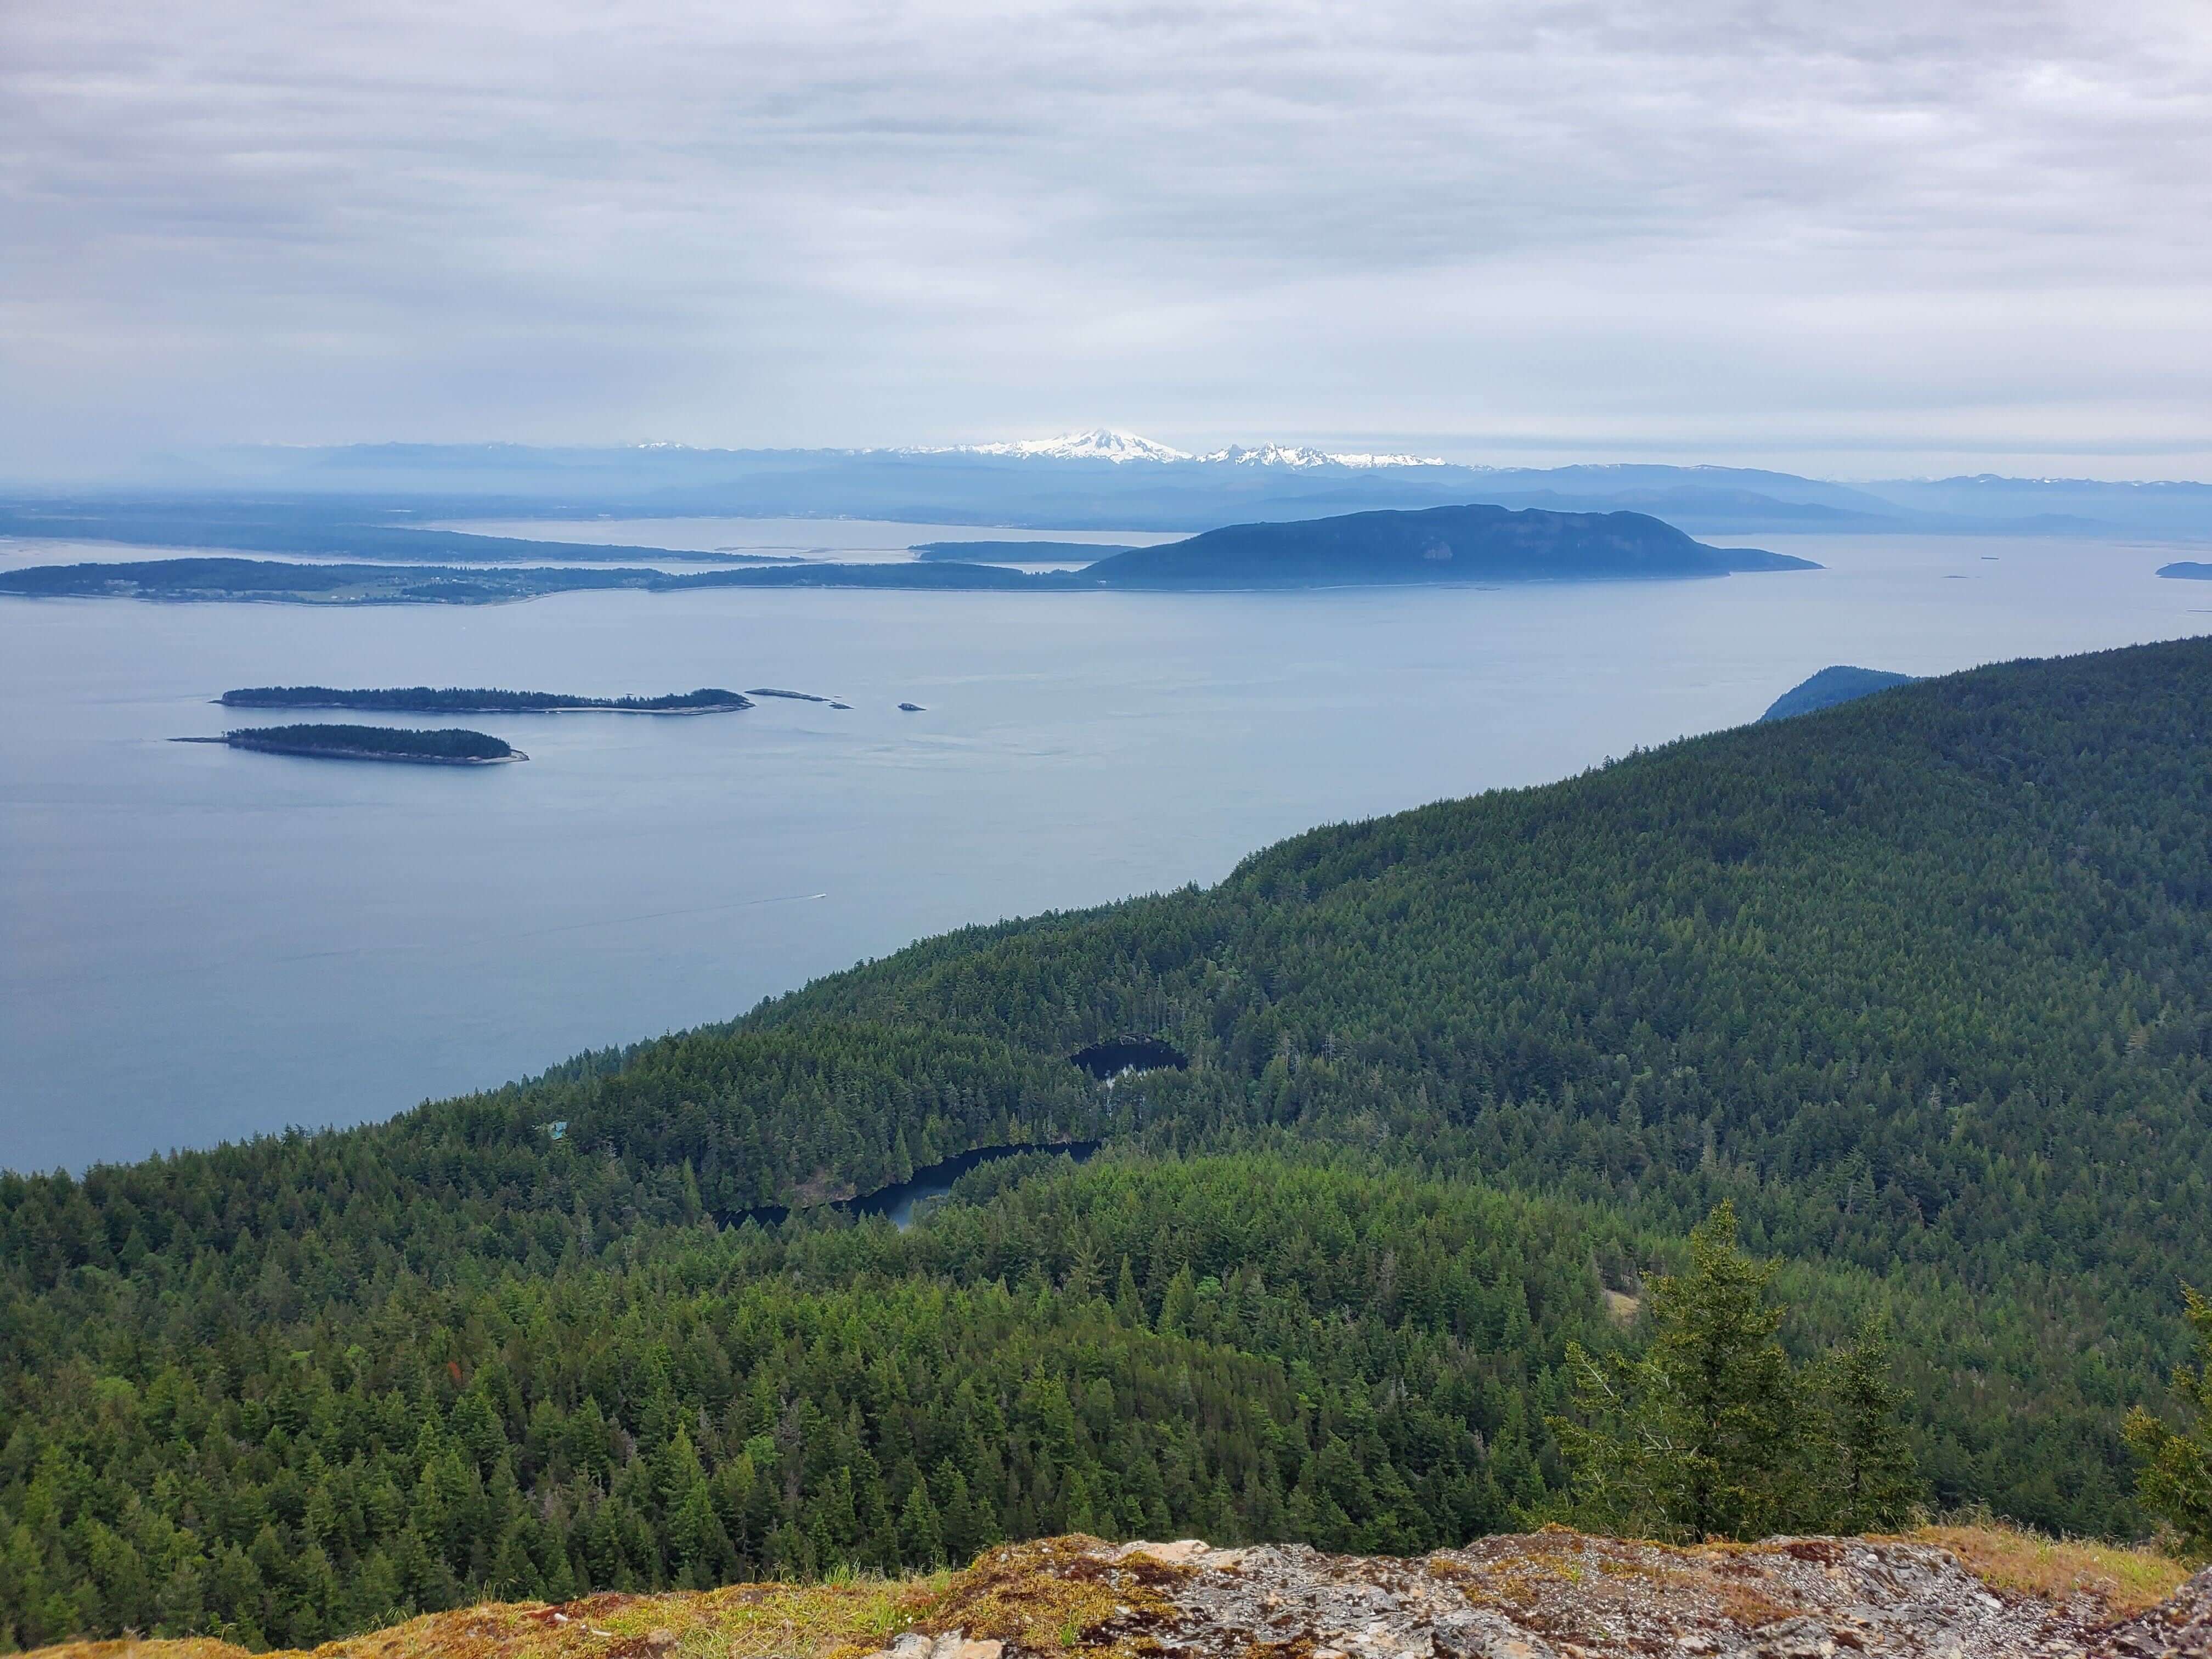 View of Mt. Baker and surrounding islands from Mount Constitution on Orcas Island